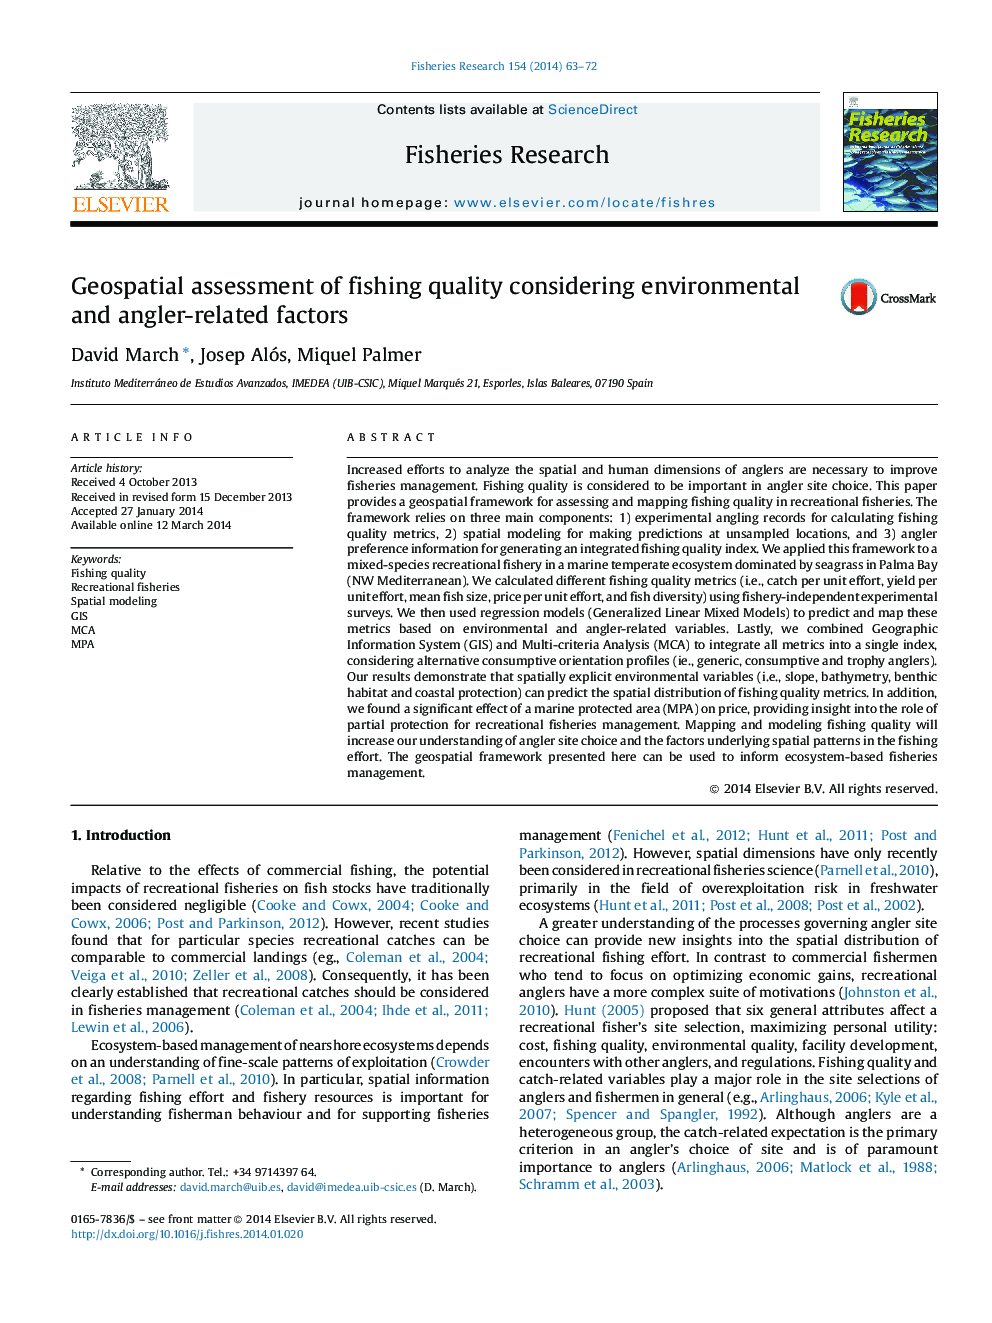 Geospatial assessment of fishing quality considering environmental and angler-related factors